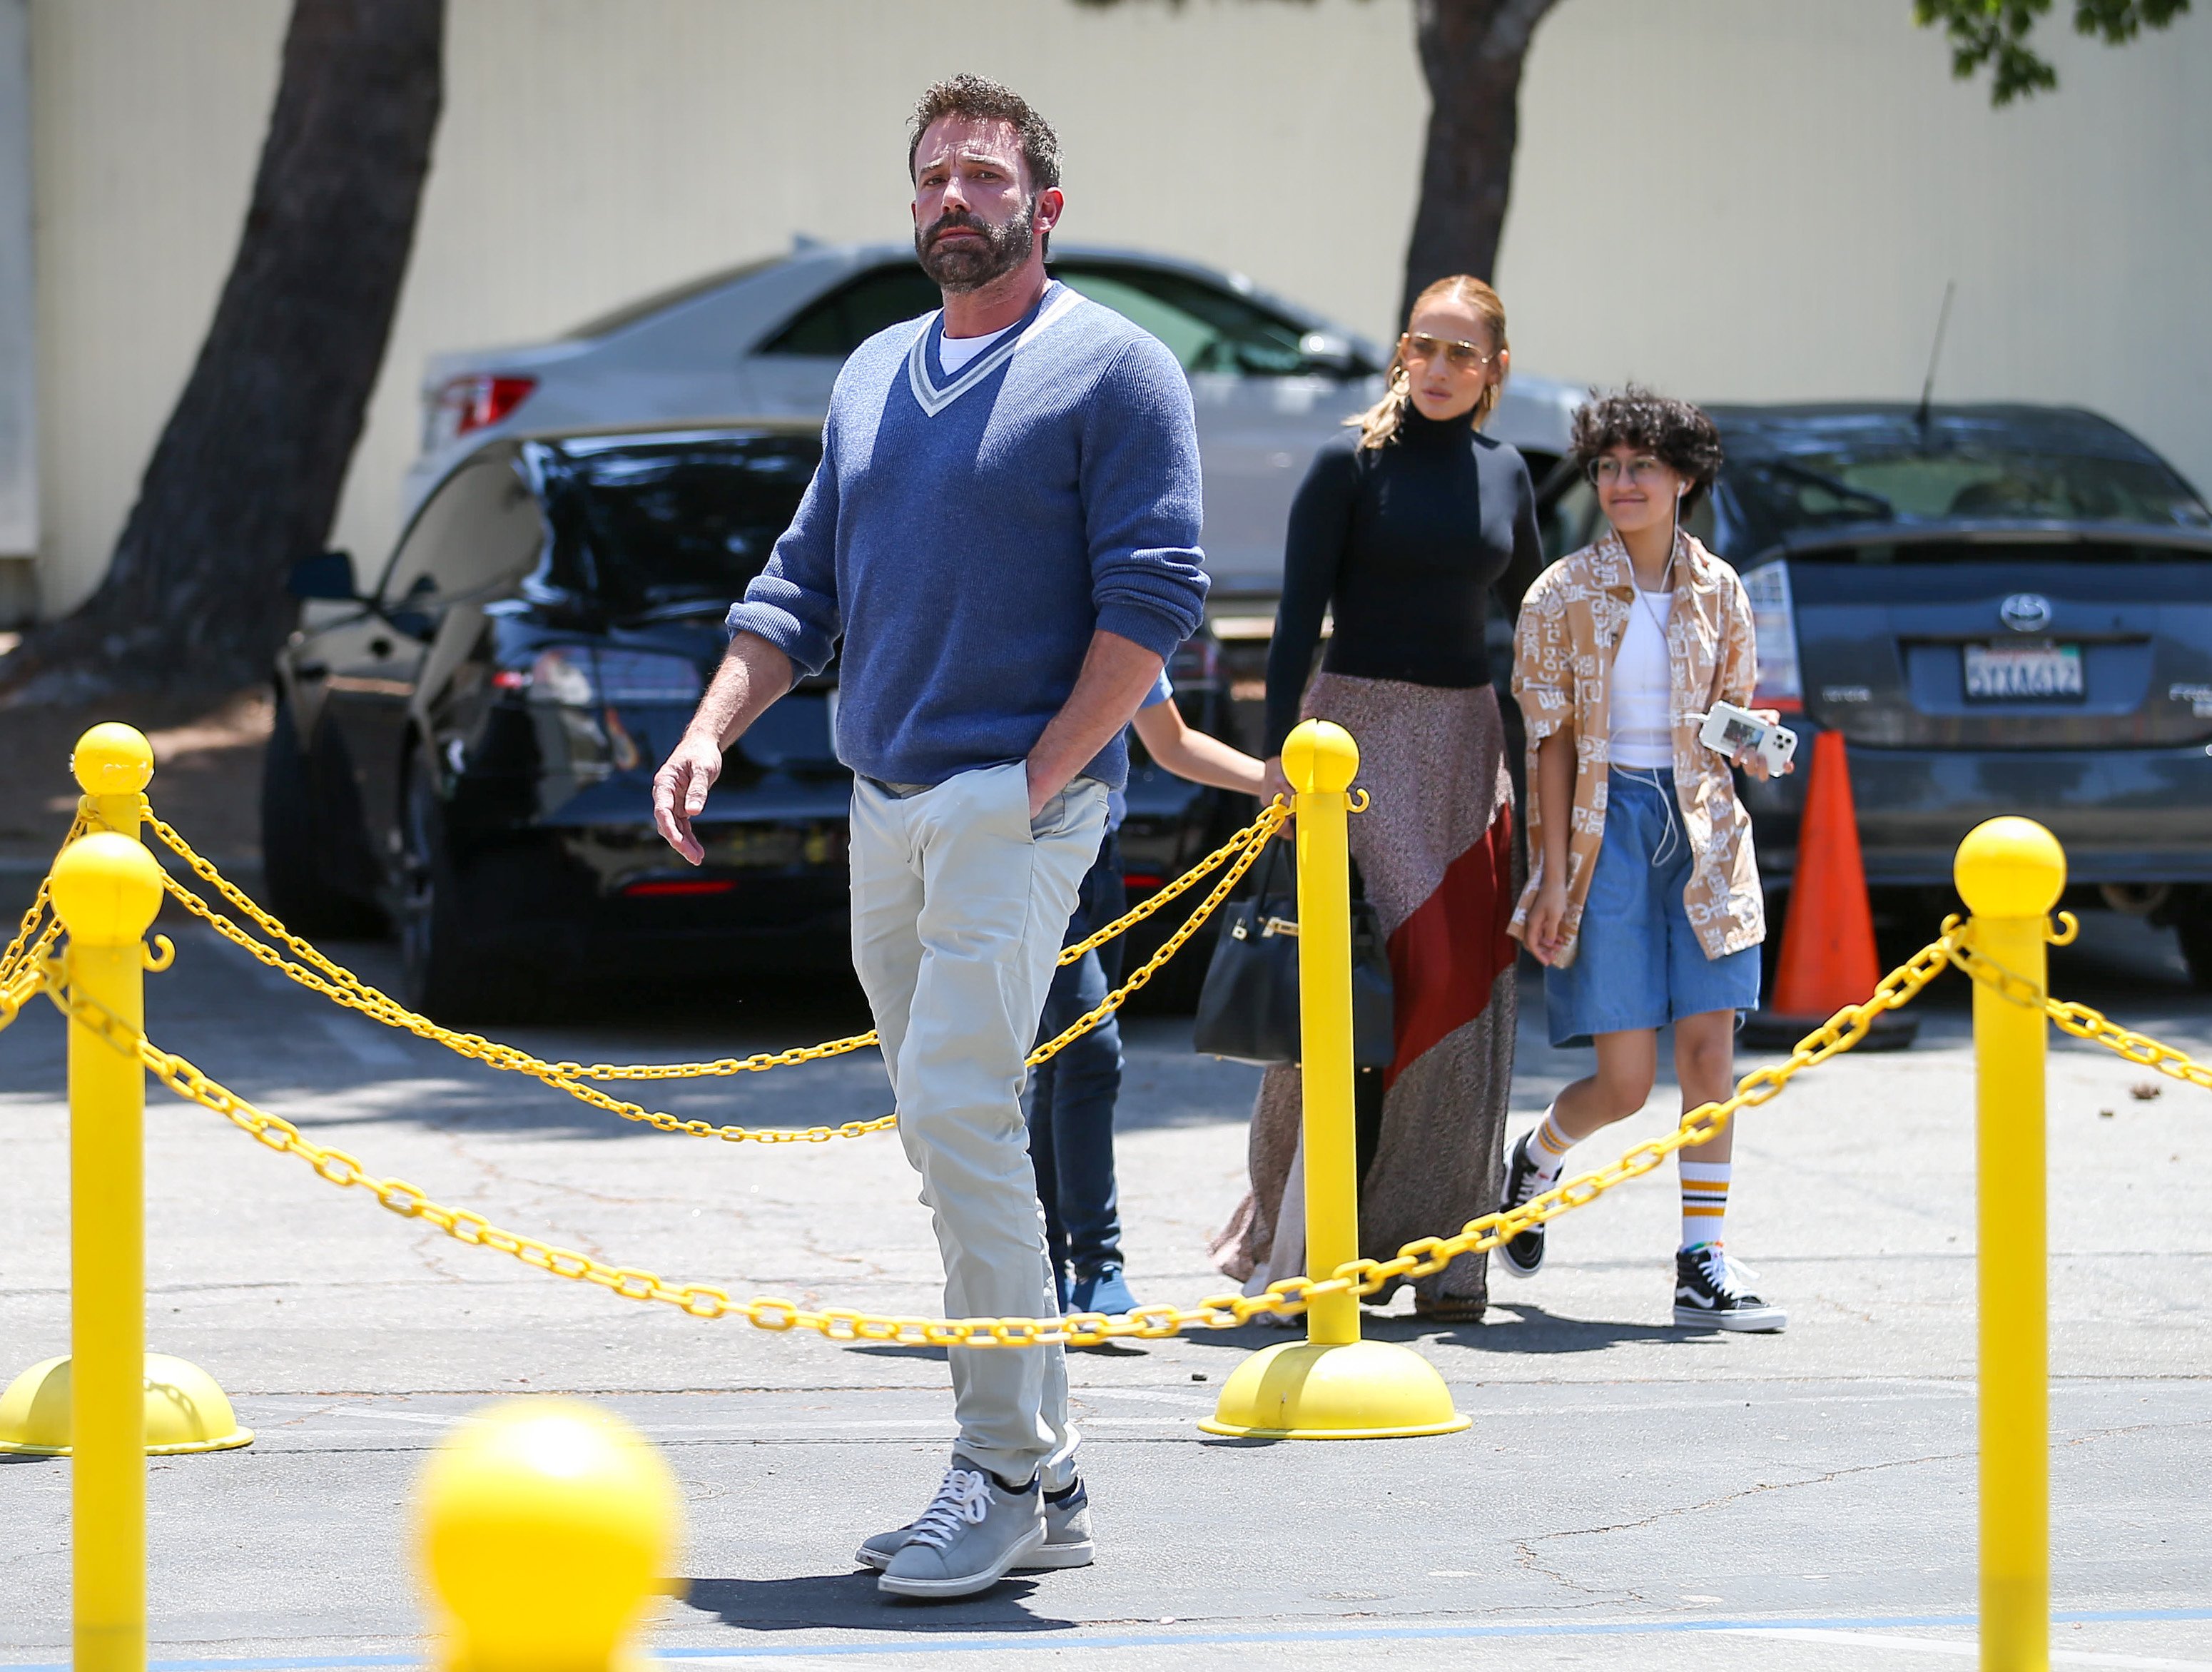 Ben Affleck, Jennifer Lopez and her daughter Emme spotted on July 03, 2022 in Los Angeles, California. | Source: Getty Images